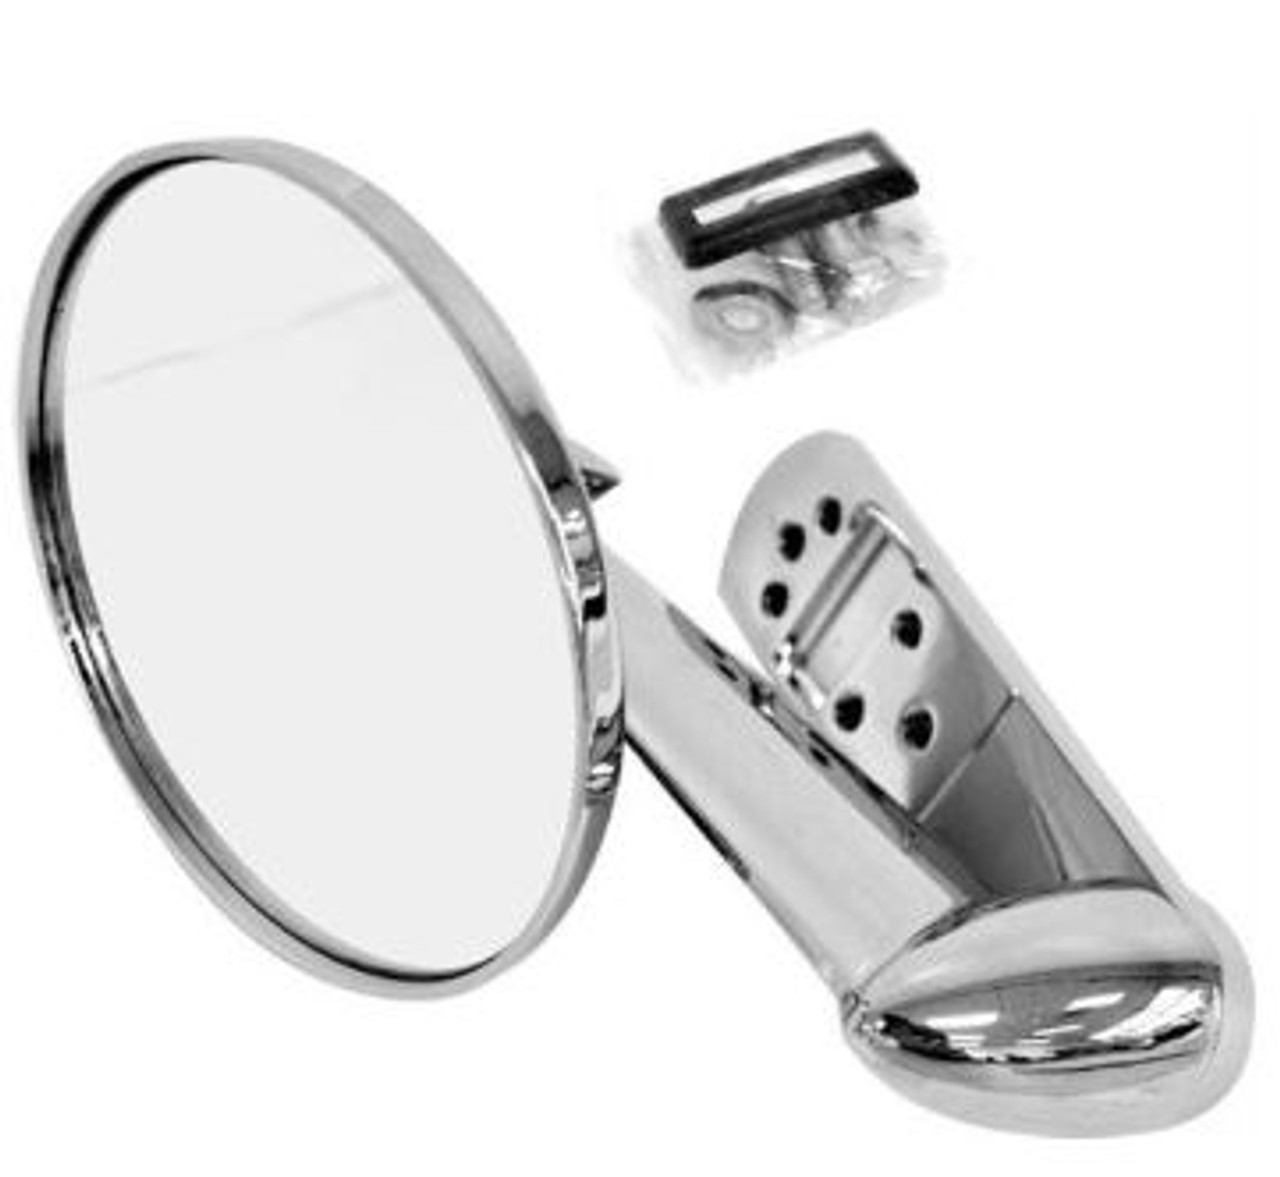 1953-66 Ford Truck Outside Mirror, ea. (4 7/8" Stainless Steel Head) (RH or LH)